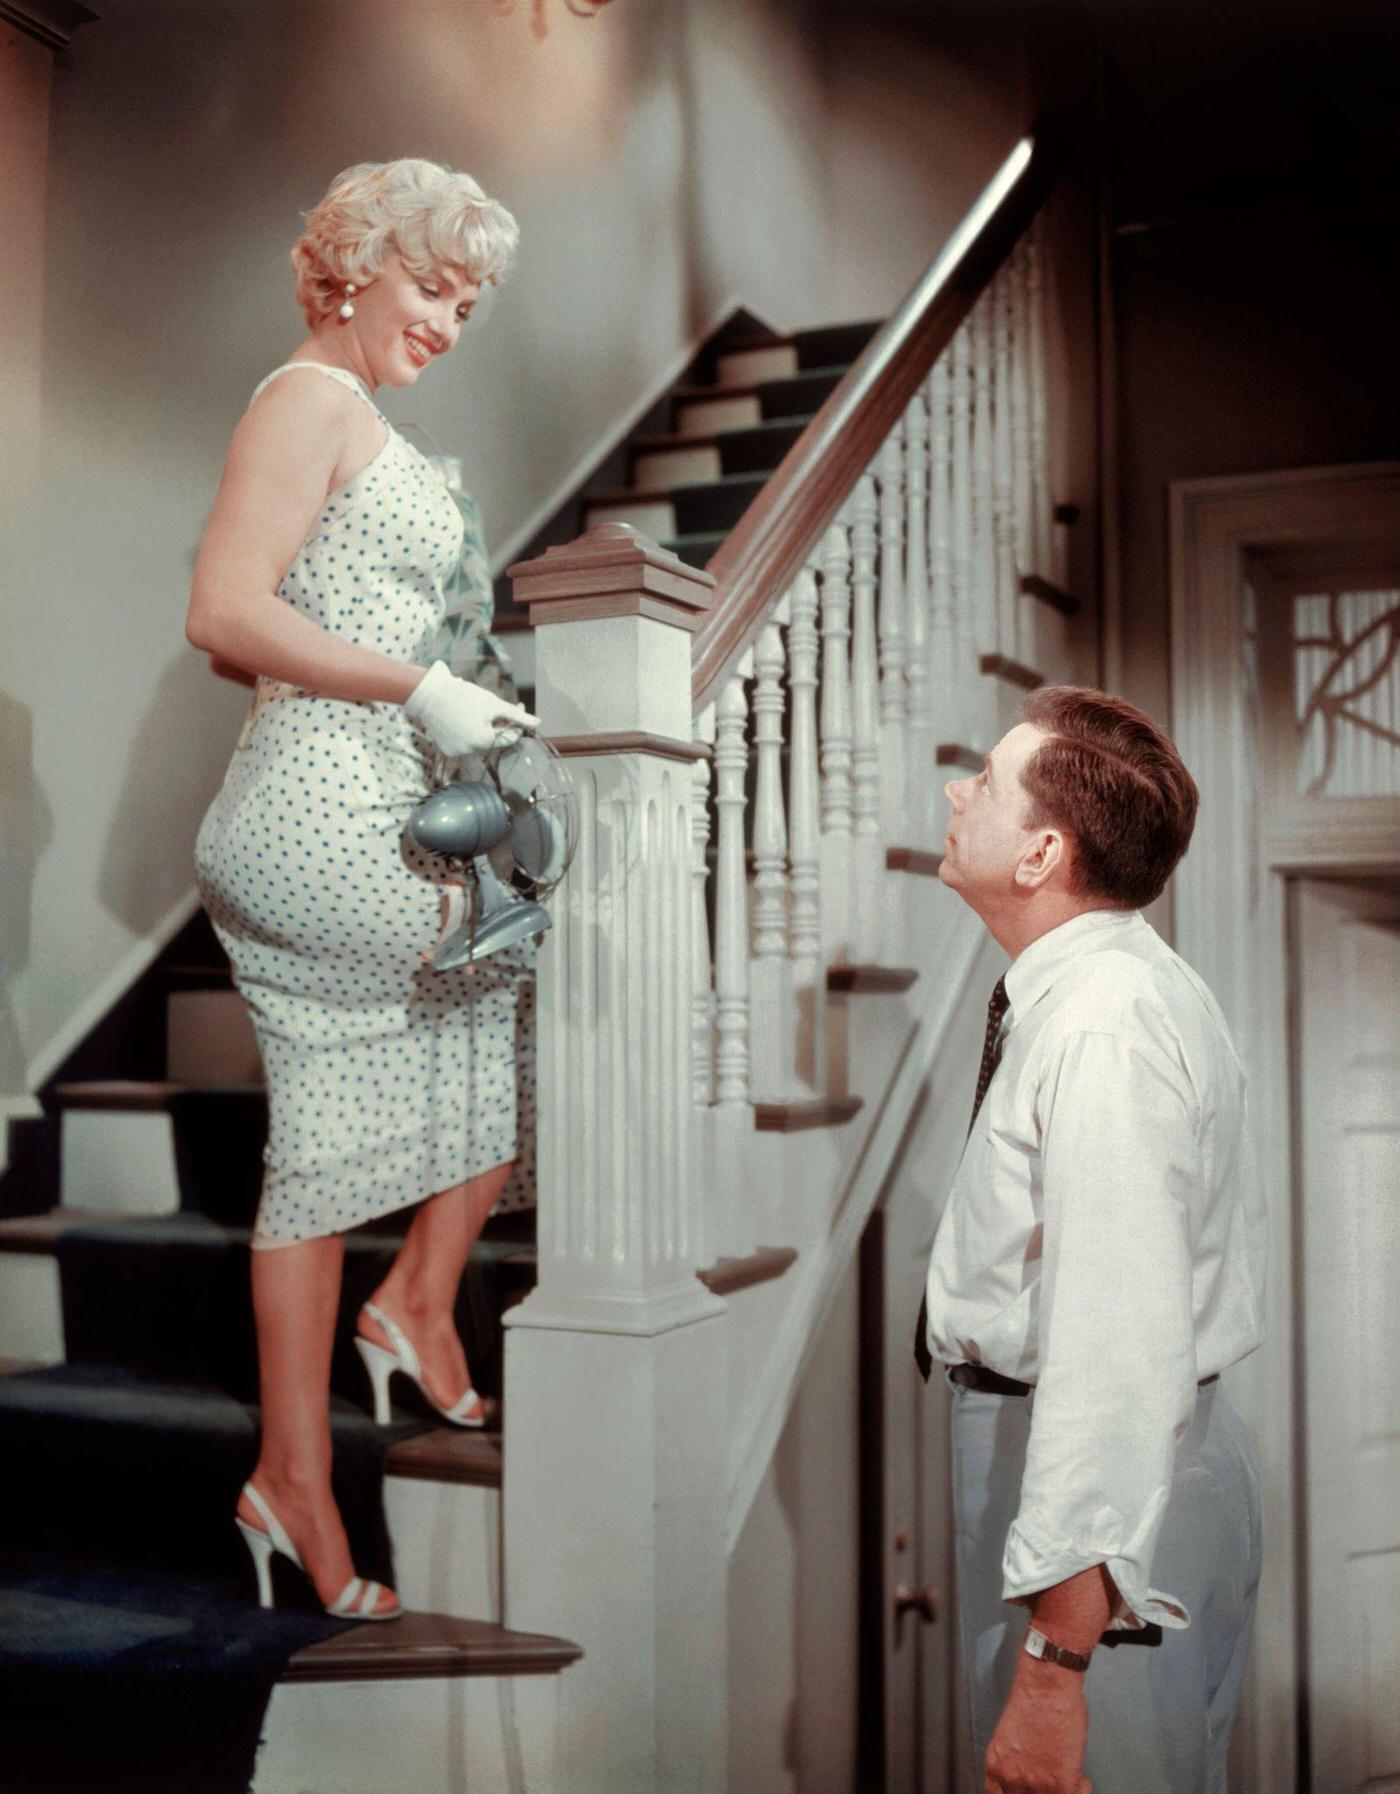 Marilyn Monroe and Tom Ewell in a publicity still for the film 'The Seven Year Itch' in 1955 in Los Angeles